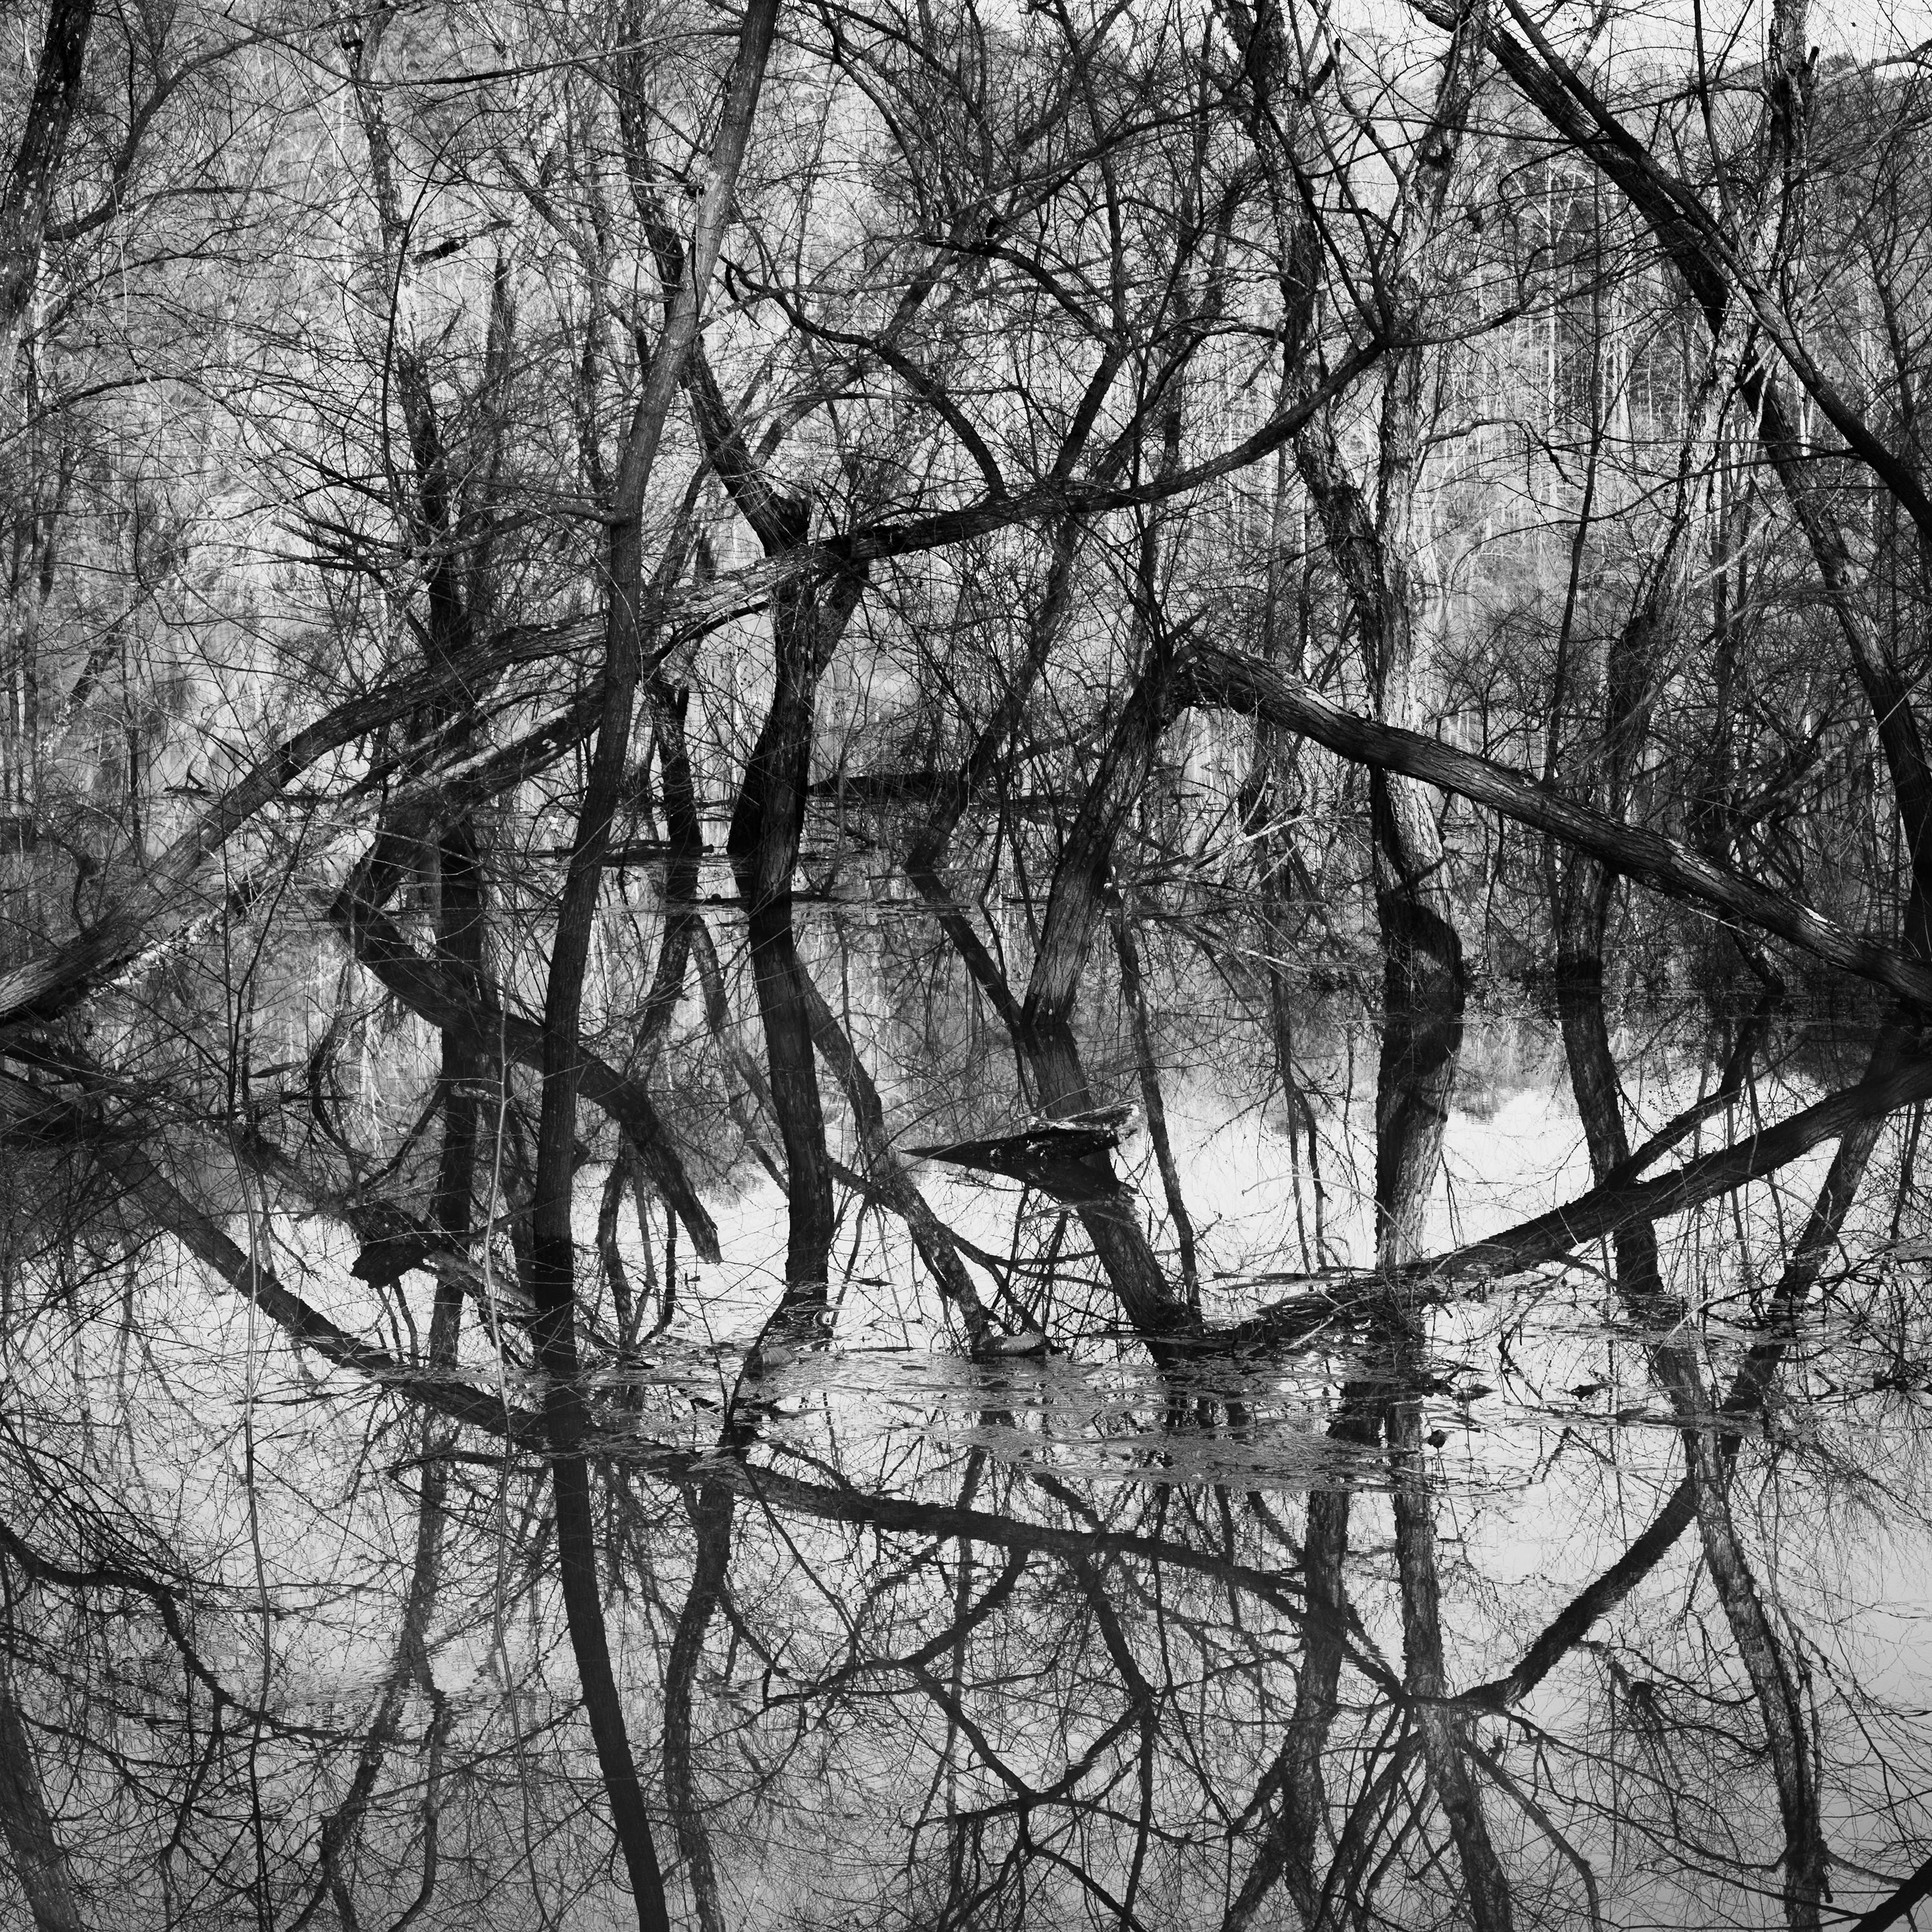 'Reflections of Self' is a black and white landscape photograph taken near the Chattahoochee River. Additional sizes are available. This listing is for an unframed print, edition 1/10.

Richard Skoonberg is inspired by the work of Eliot Porter, Lee